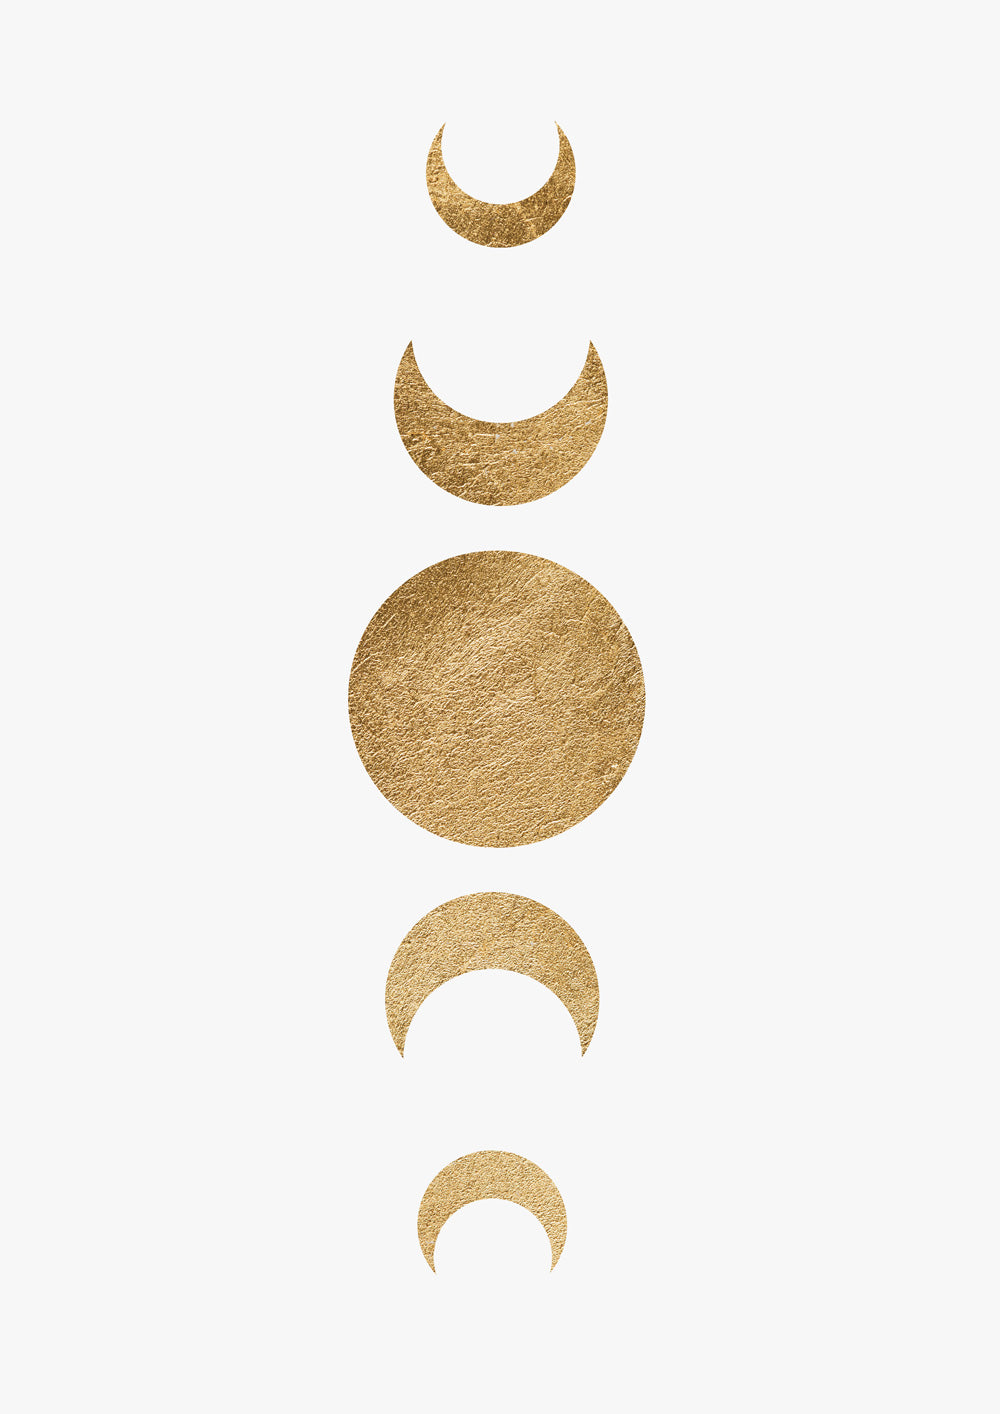 Moon Phase Wall Art Print, Modern Day Witch Artwork 'Gold Solar'